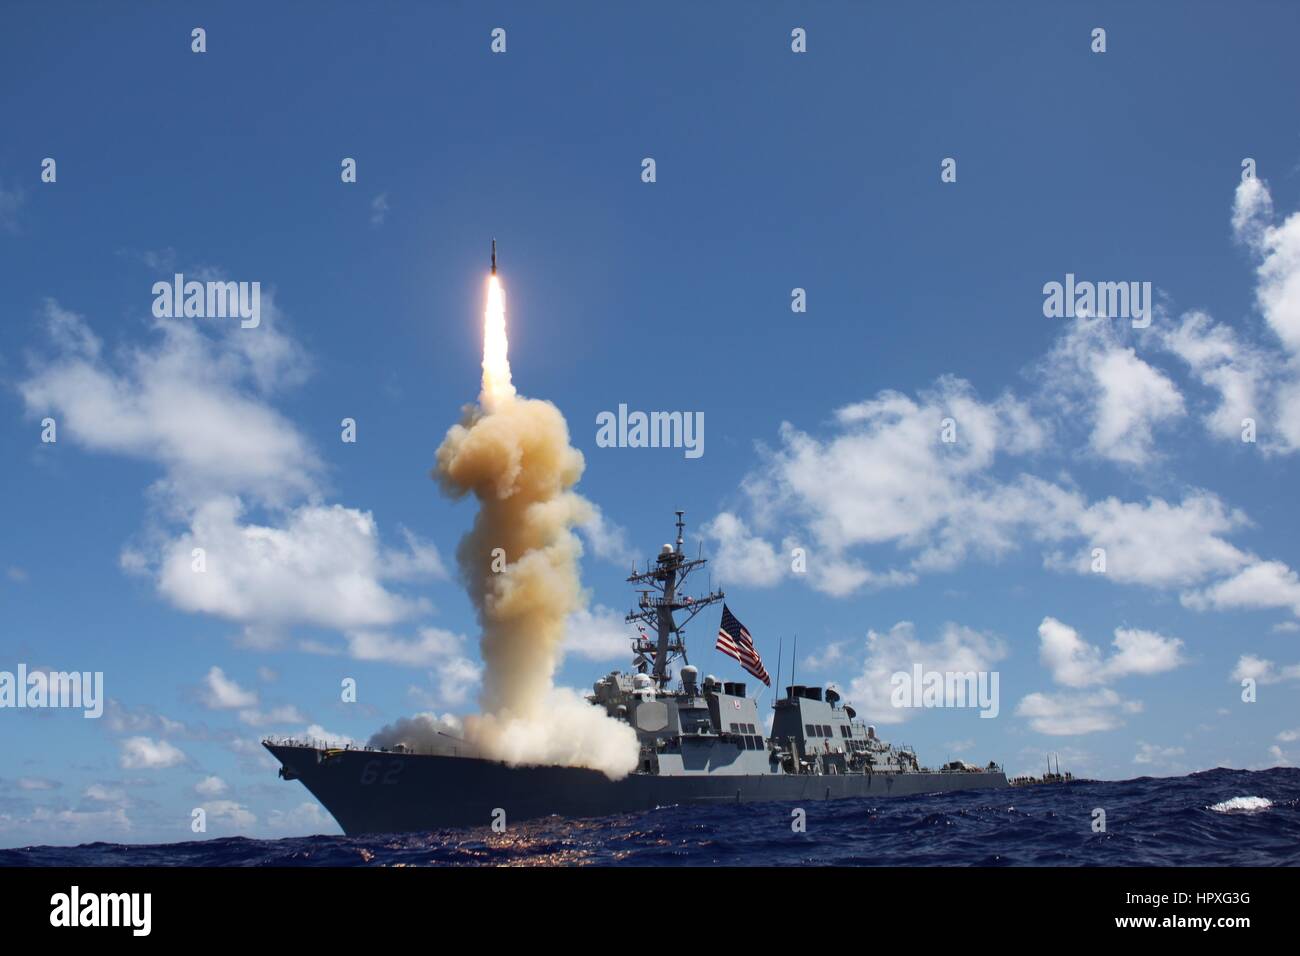 Guided-missile destroyer USS Fitzgerald (DDG 62) fires a Standard Missile-3 (SM-3) during a joint ballistic missile defense exercise, Pacific Ocean, 2012. Image courtesy US Navy. Stock Photo